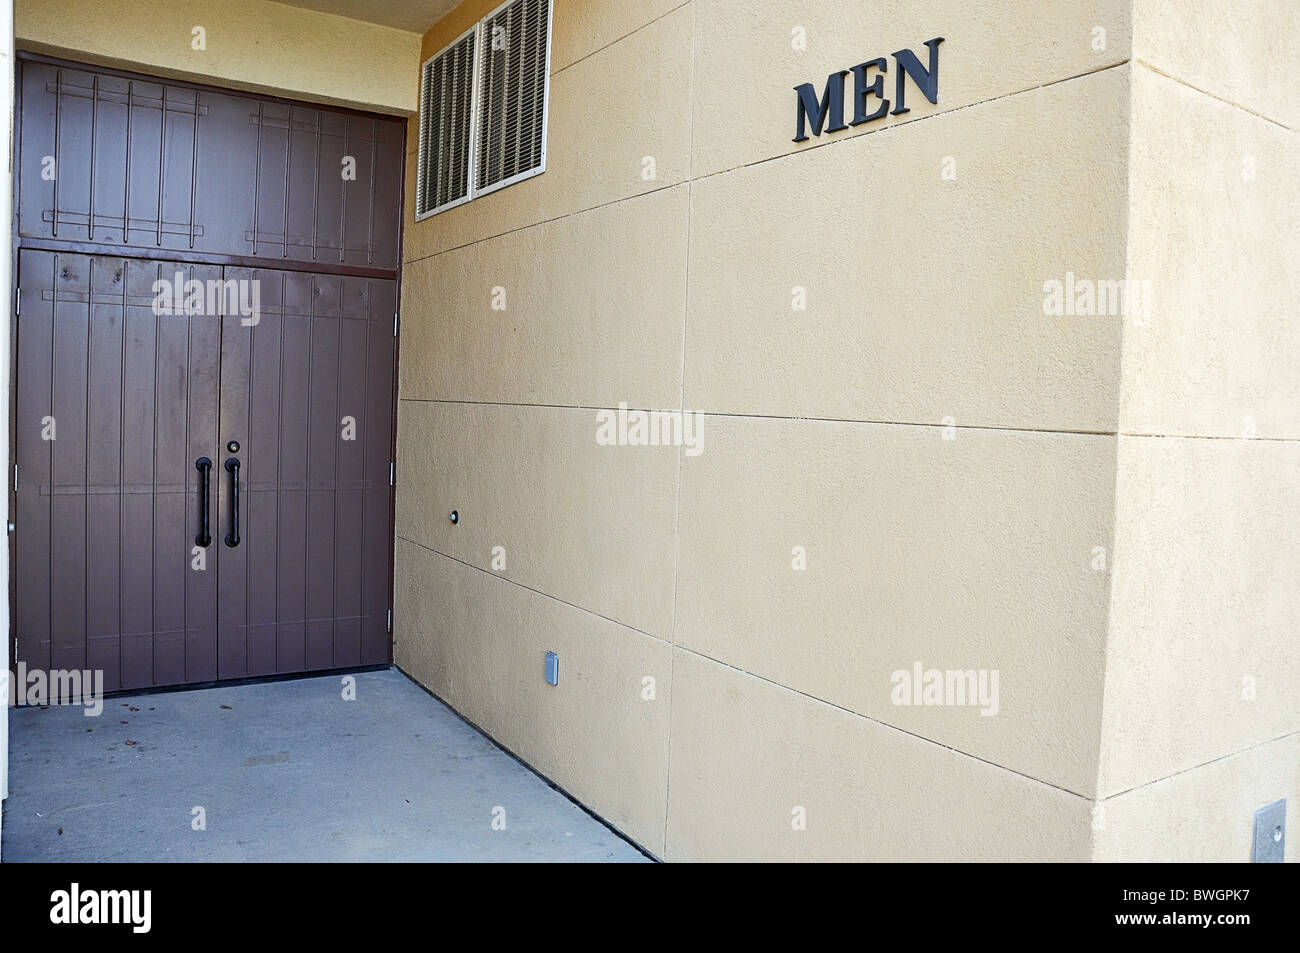 Entrance to men's restroom showing sign and doors. Stock Photo